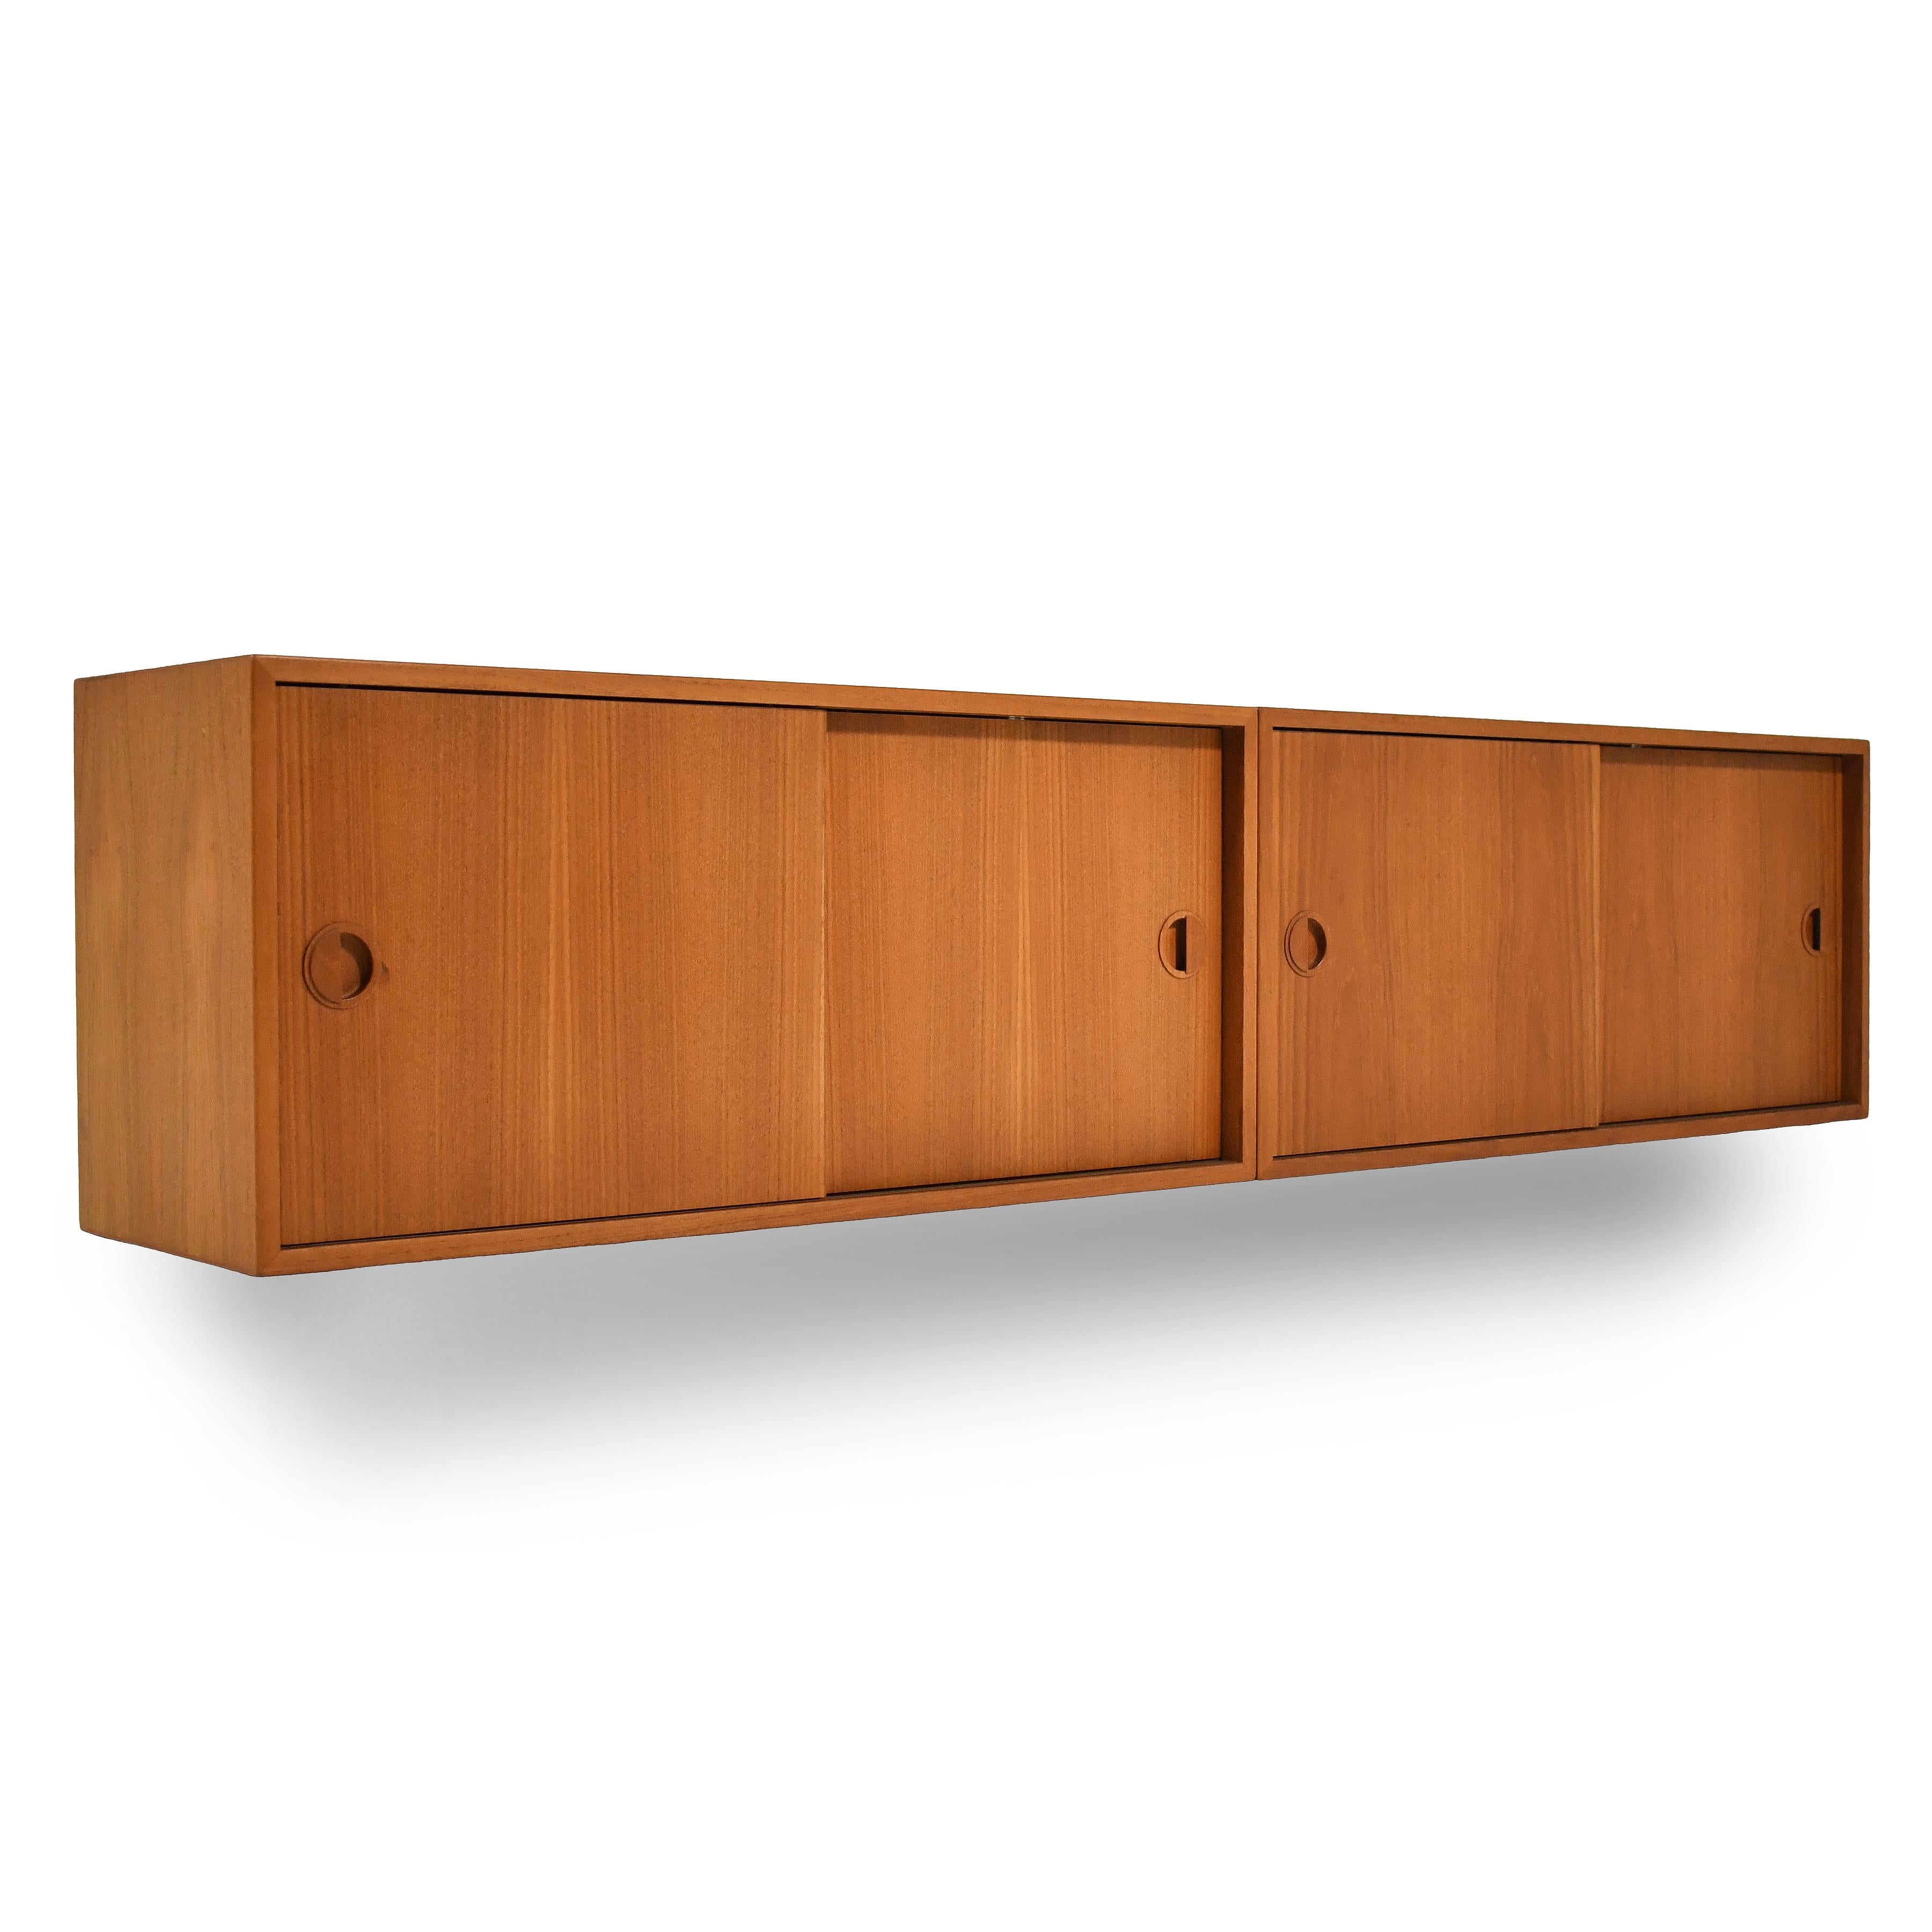 This handsome pair of teak floating wall cabinets were made in Denmark by Hansen and Guldbord (HG Furniture). The clean-lined cabinets have round sculptural pulls on the sliding doors which conceal adjustable shelves.

 These cabinets were used by